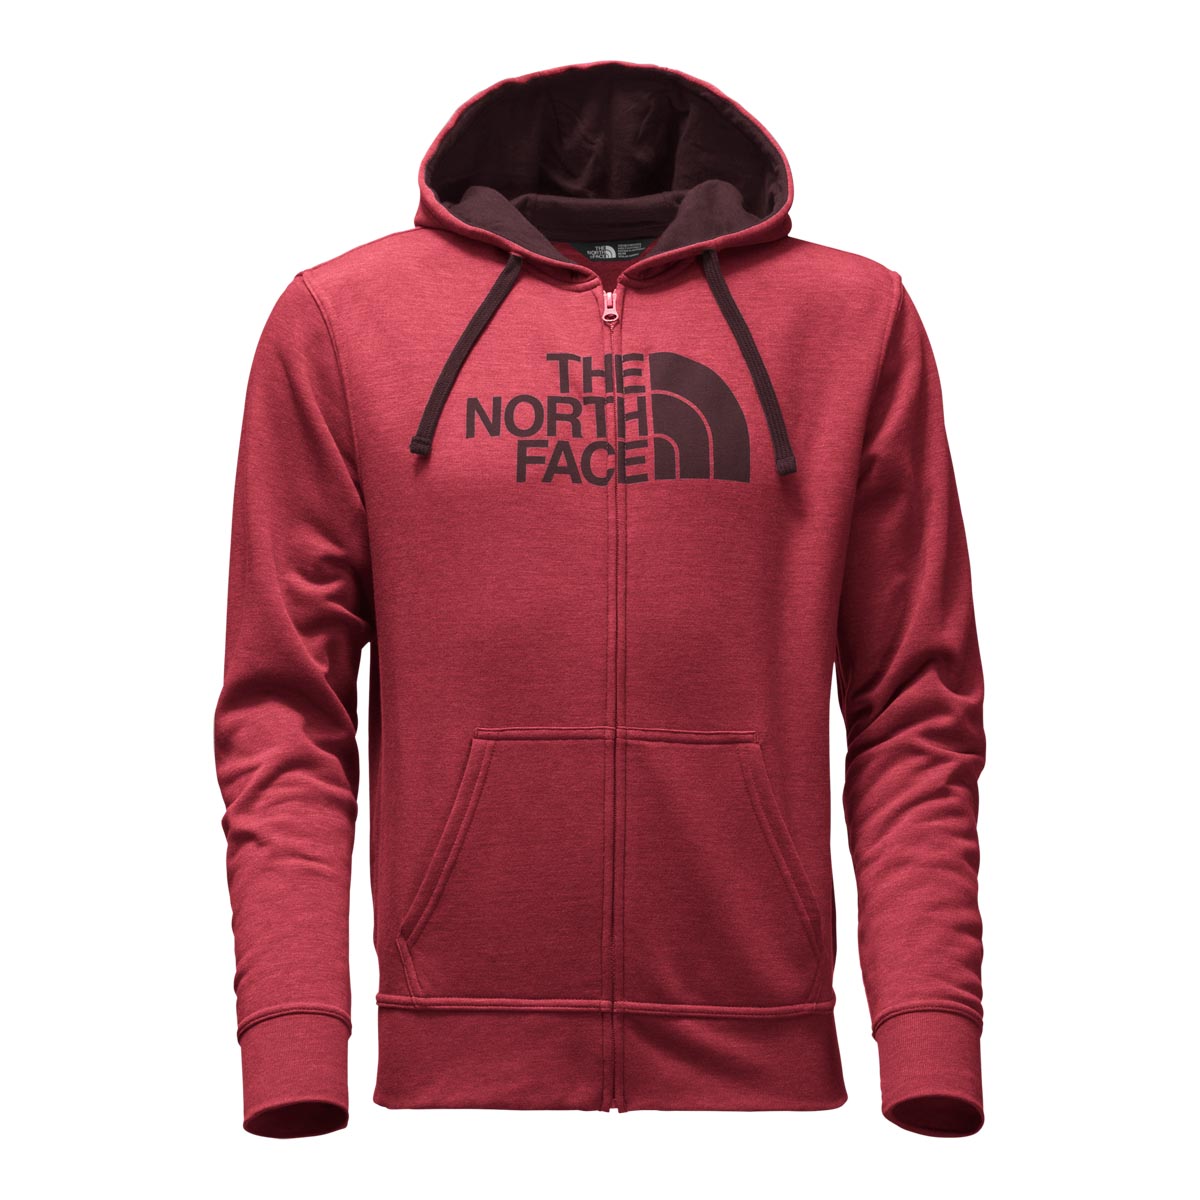 The North Face Men's Half Dome Full Zip Hoodie Discontinued Pricing